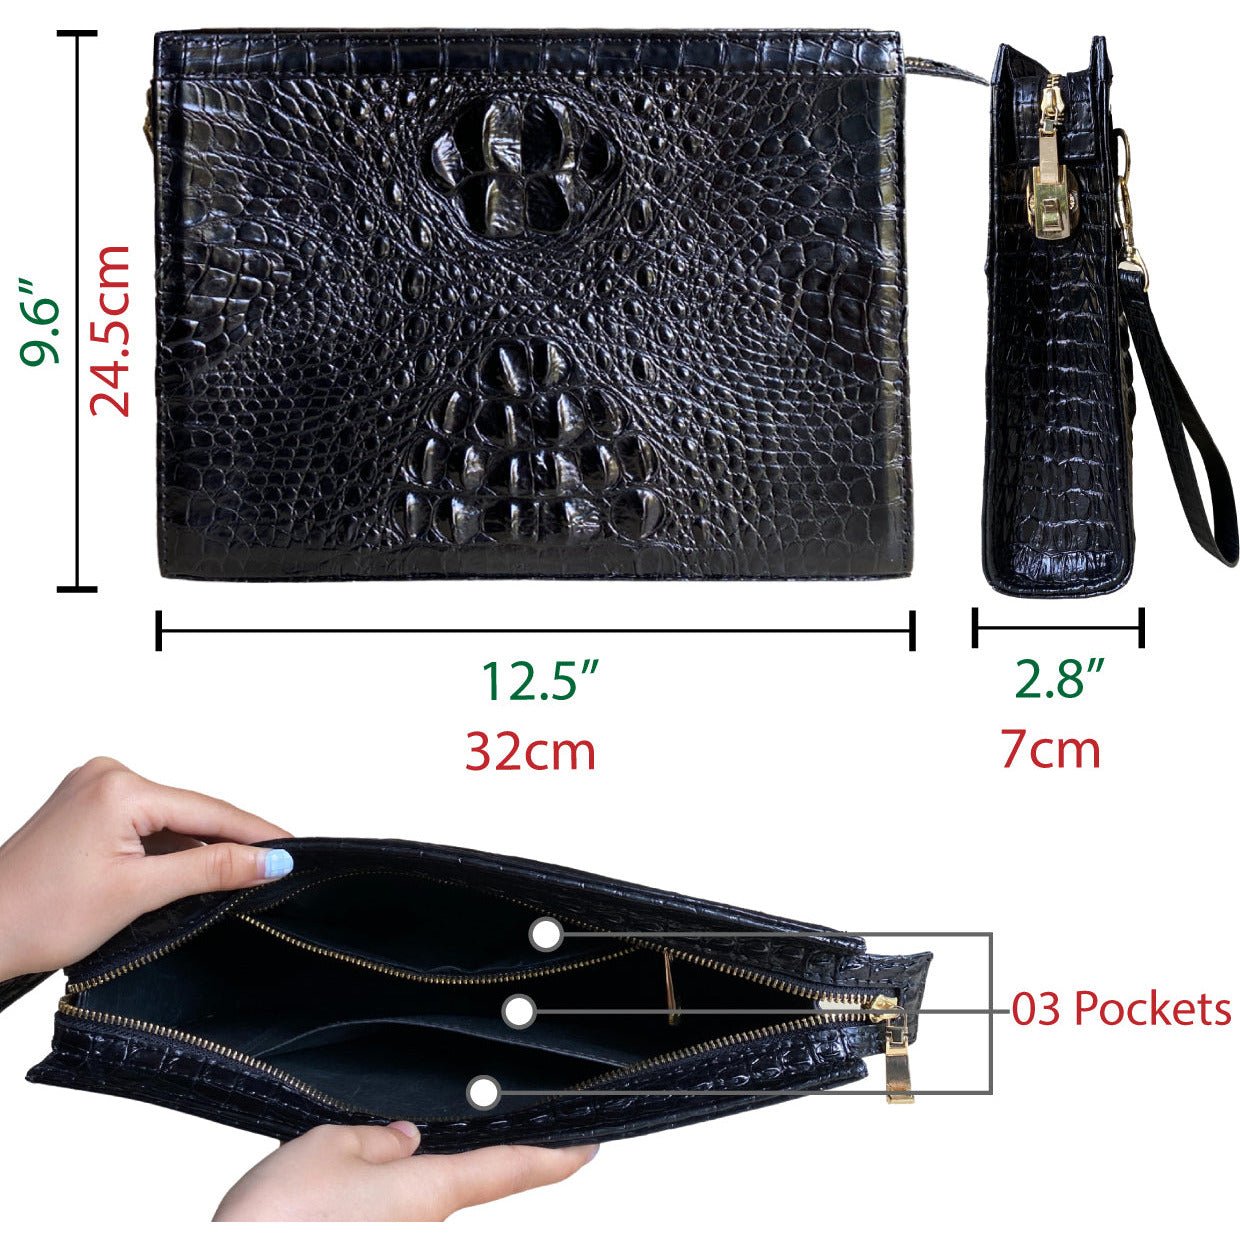 Black Cow Leather Large Clutch Bags Python Effect Message Handbags |  Baginning